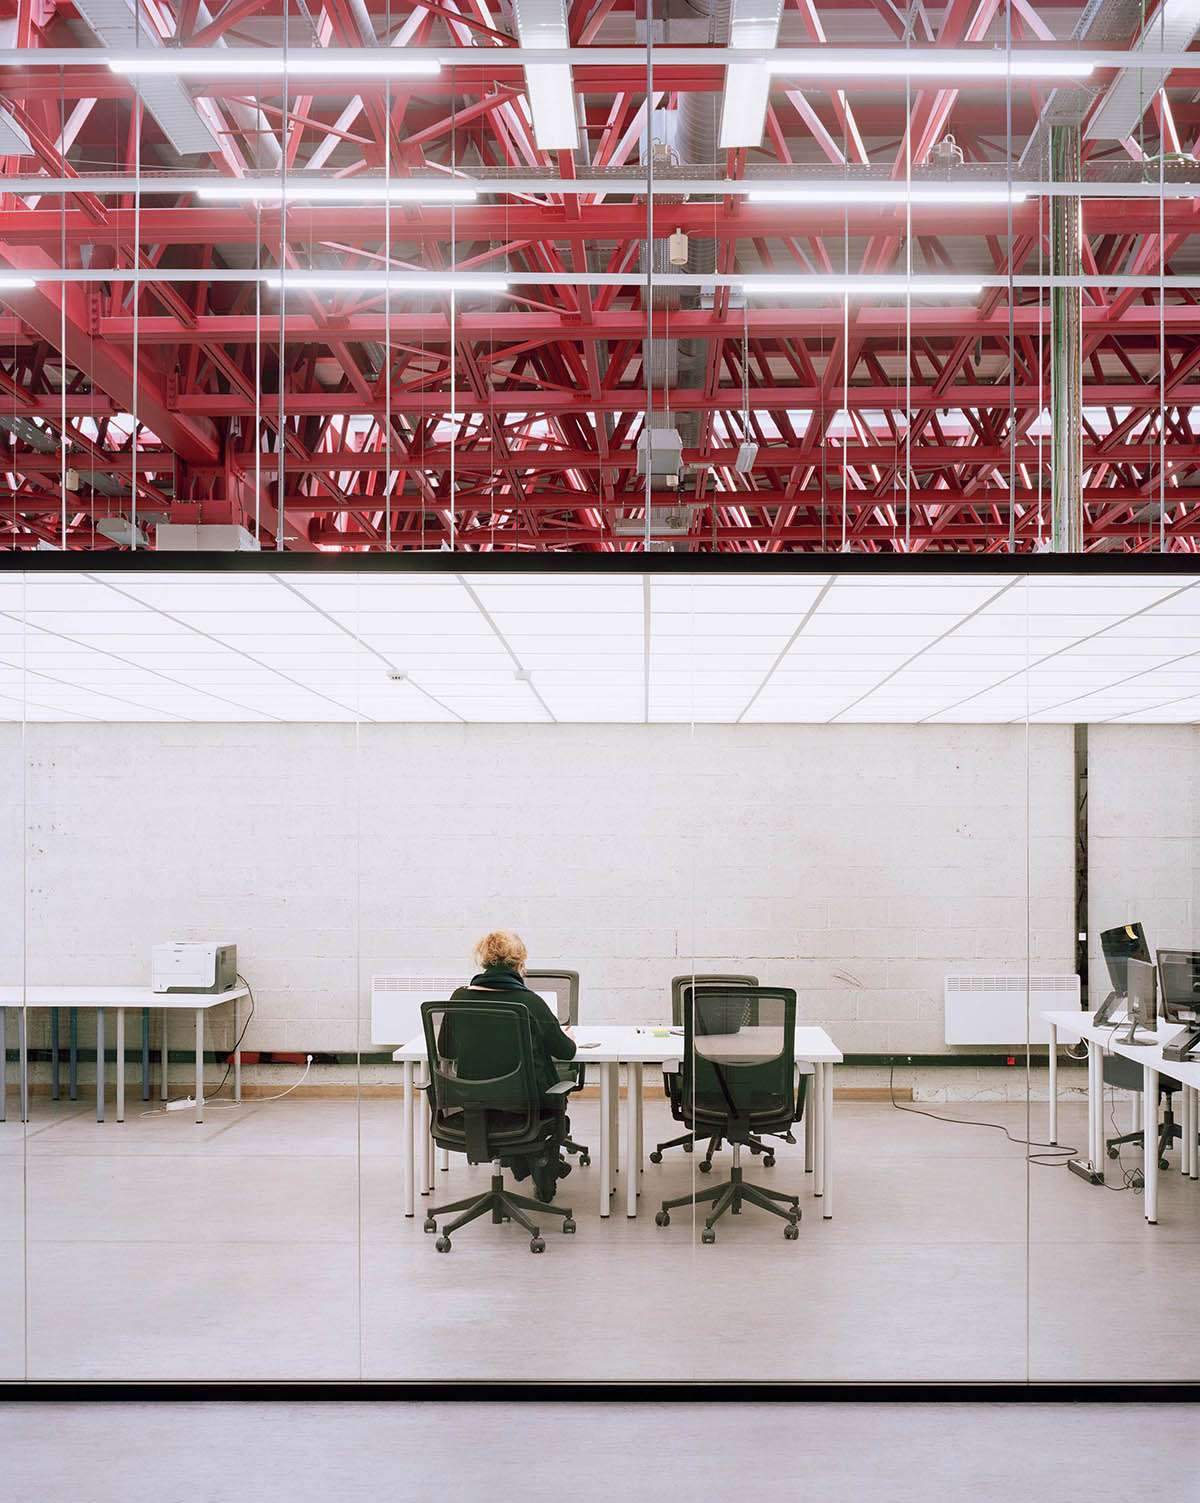 Converting an industrial building into a pink steel-roofed workspace